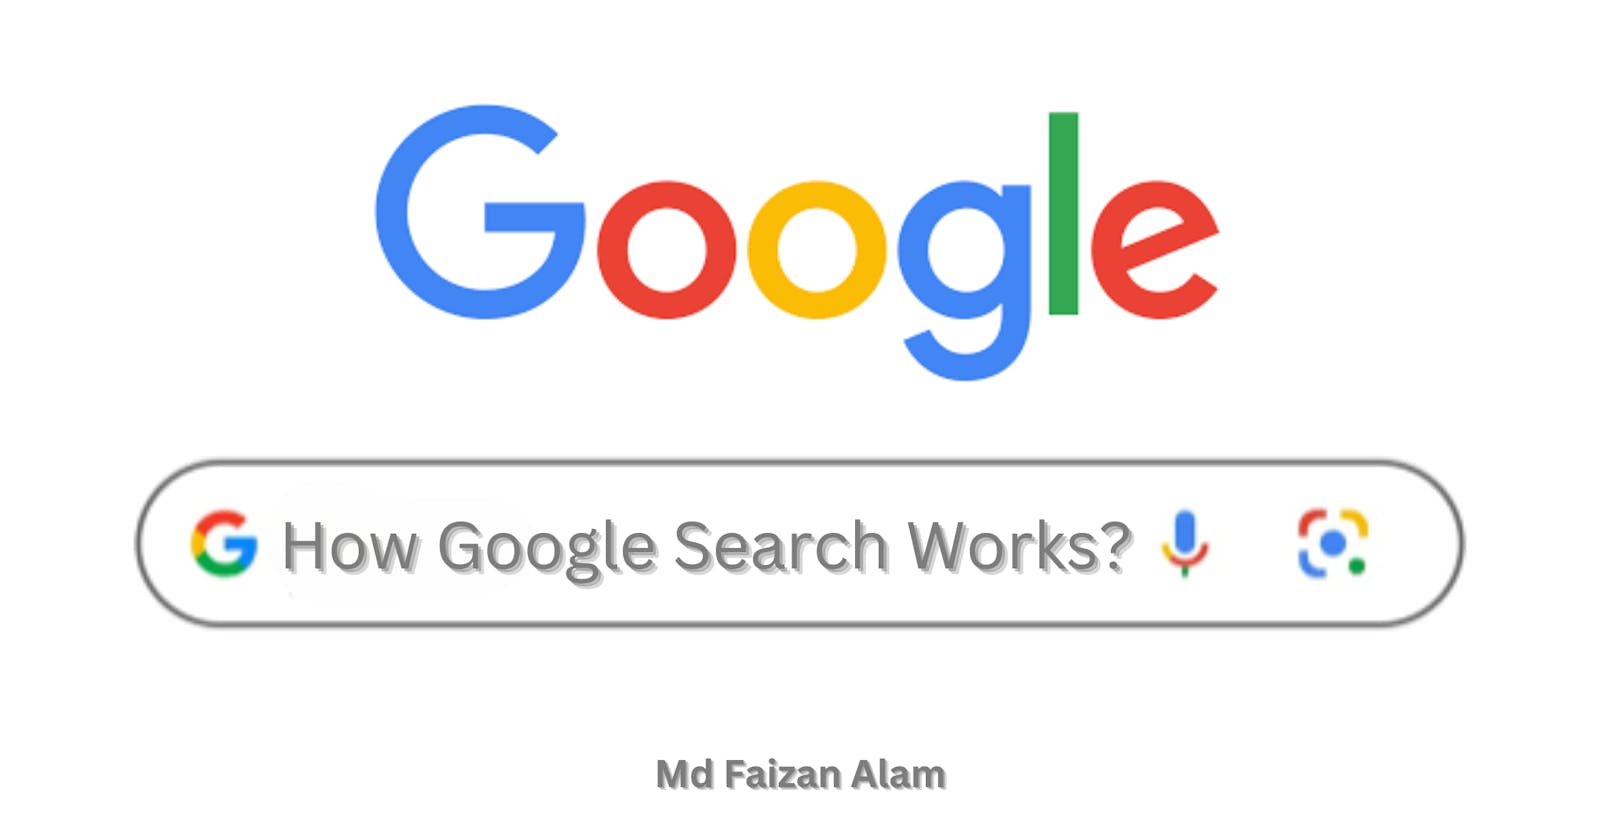 How Google Search Works?